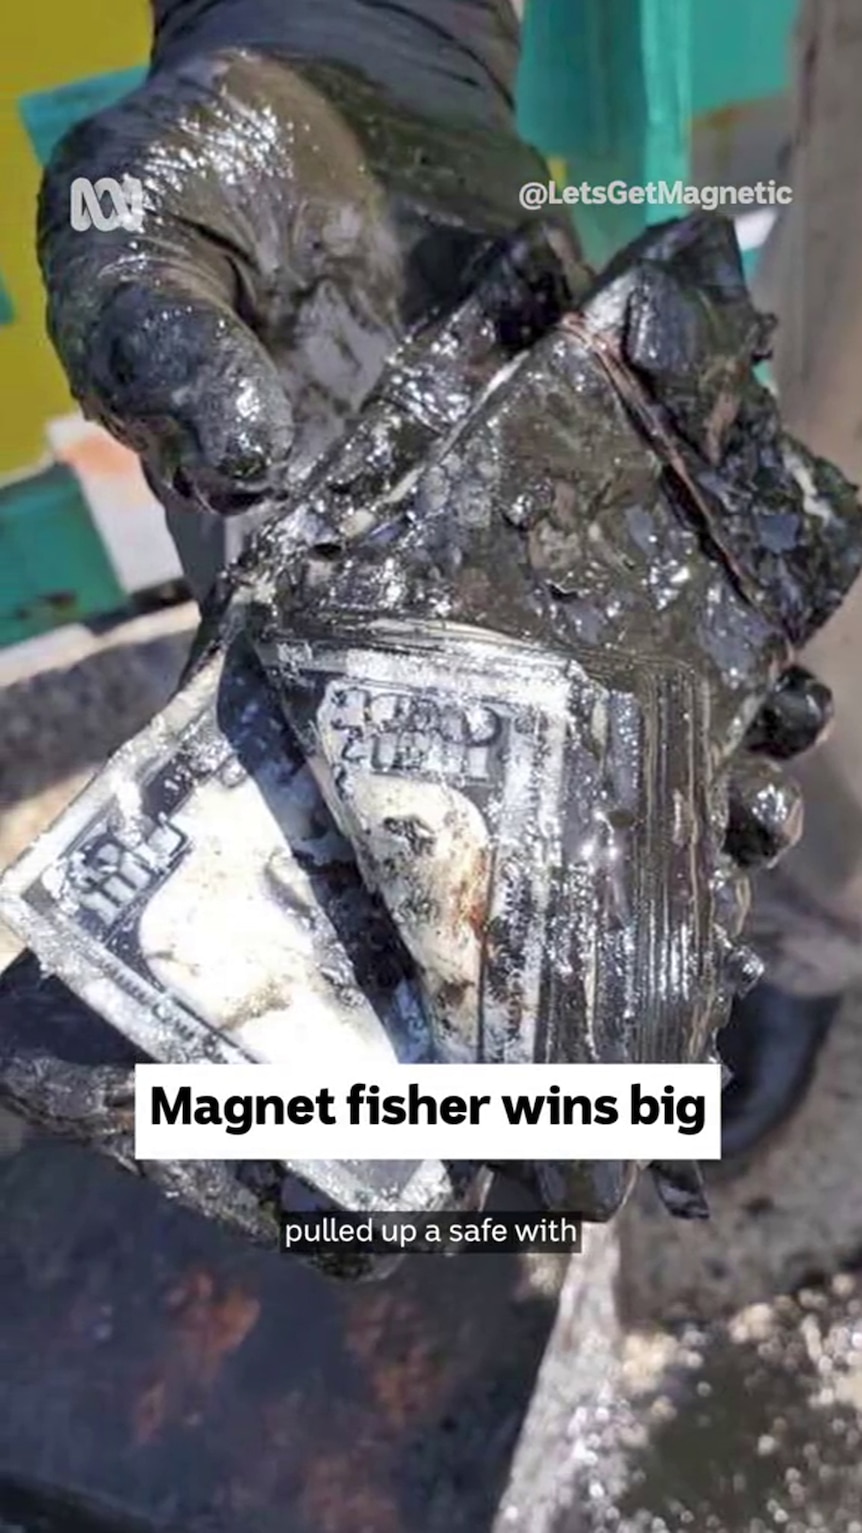 text box reads, "Magnet fisher wins big" and image shows a  wad of US $100 bills covered in sludge